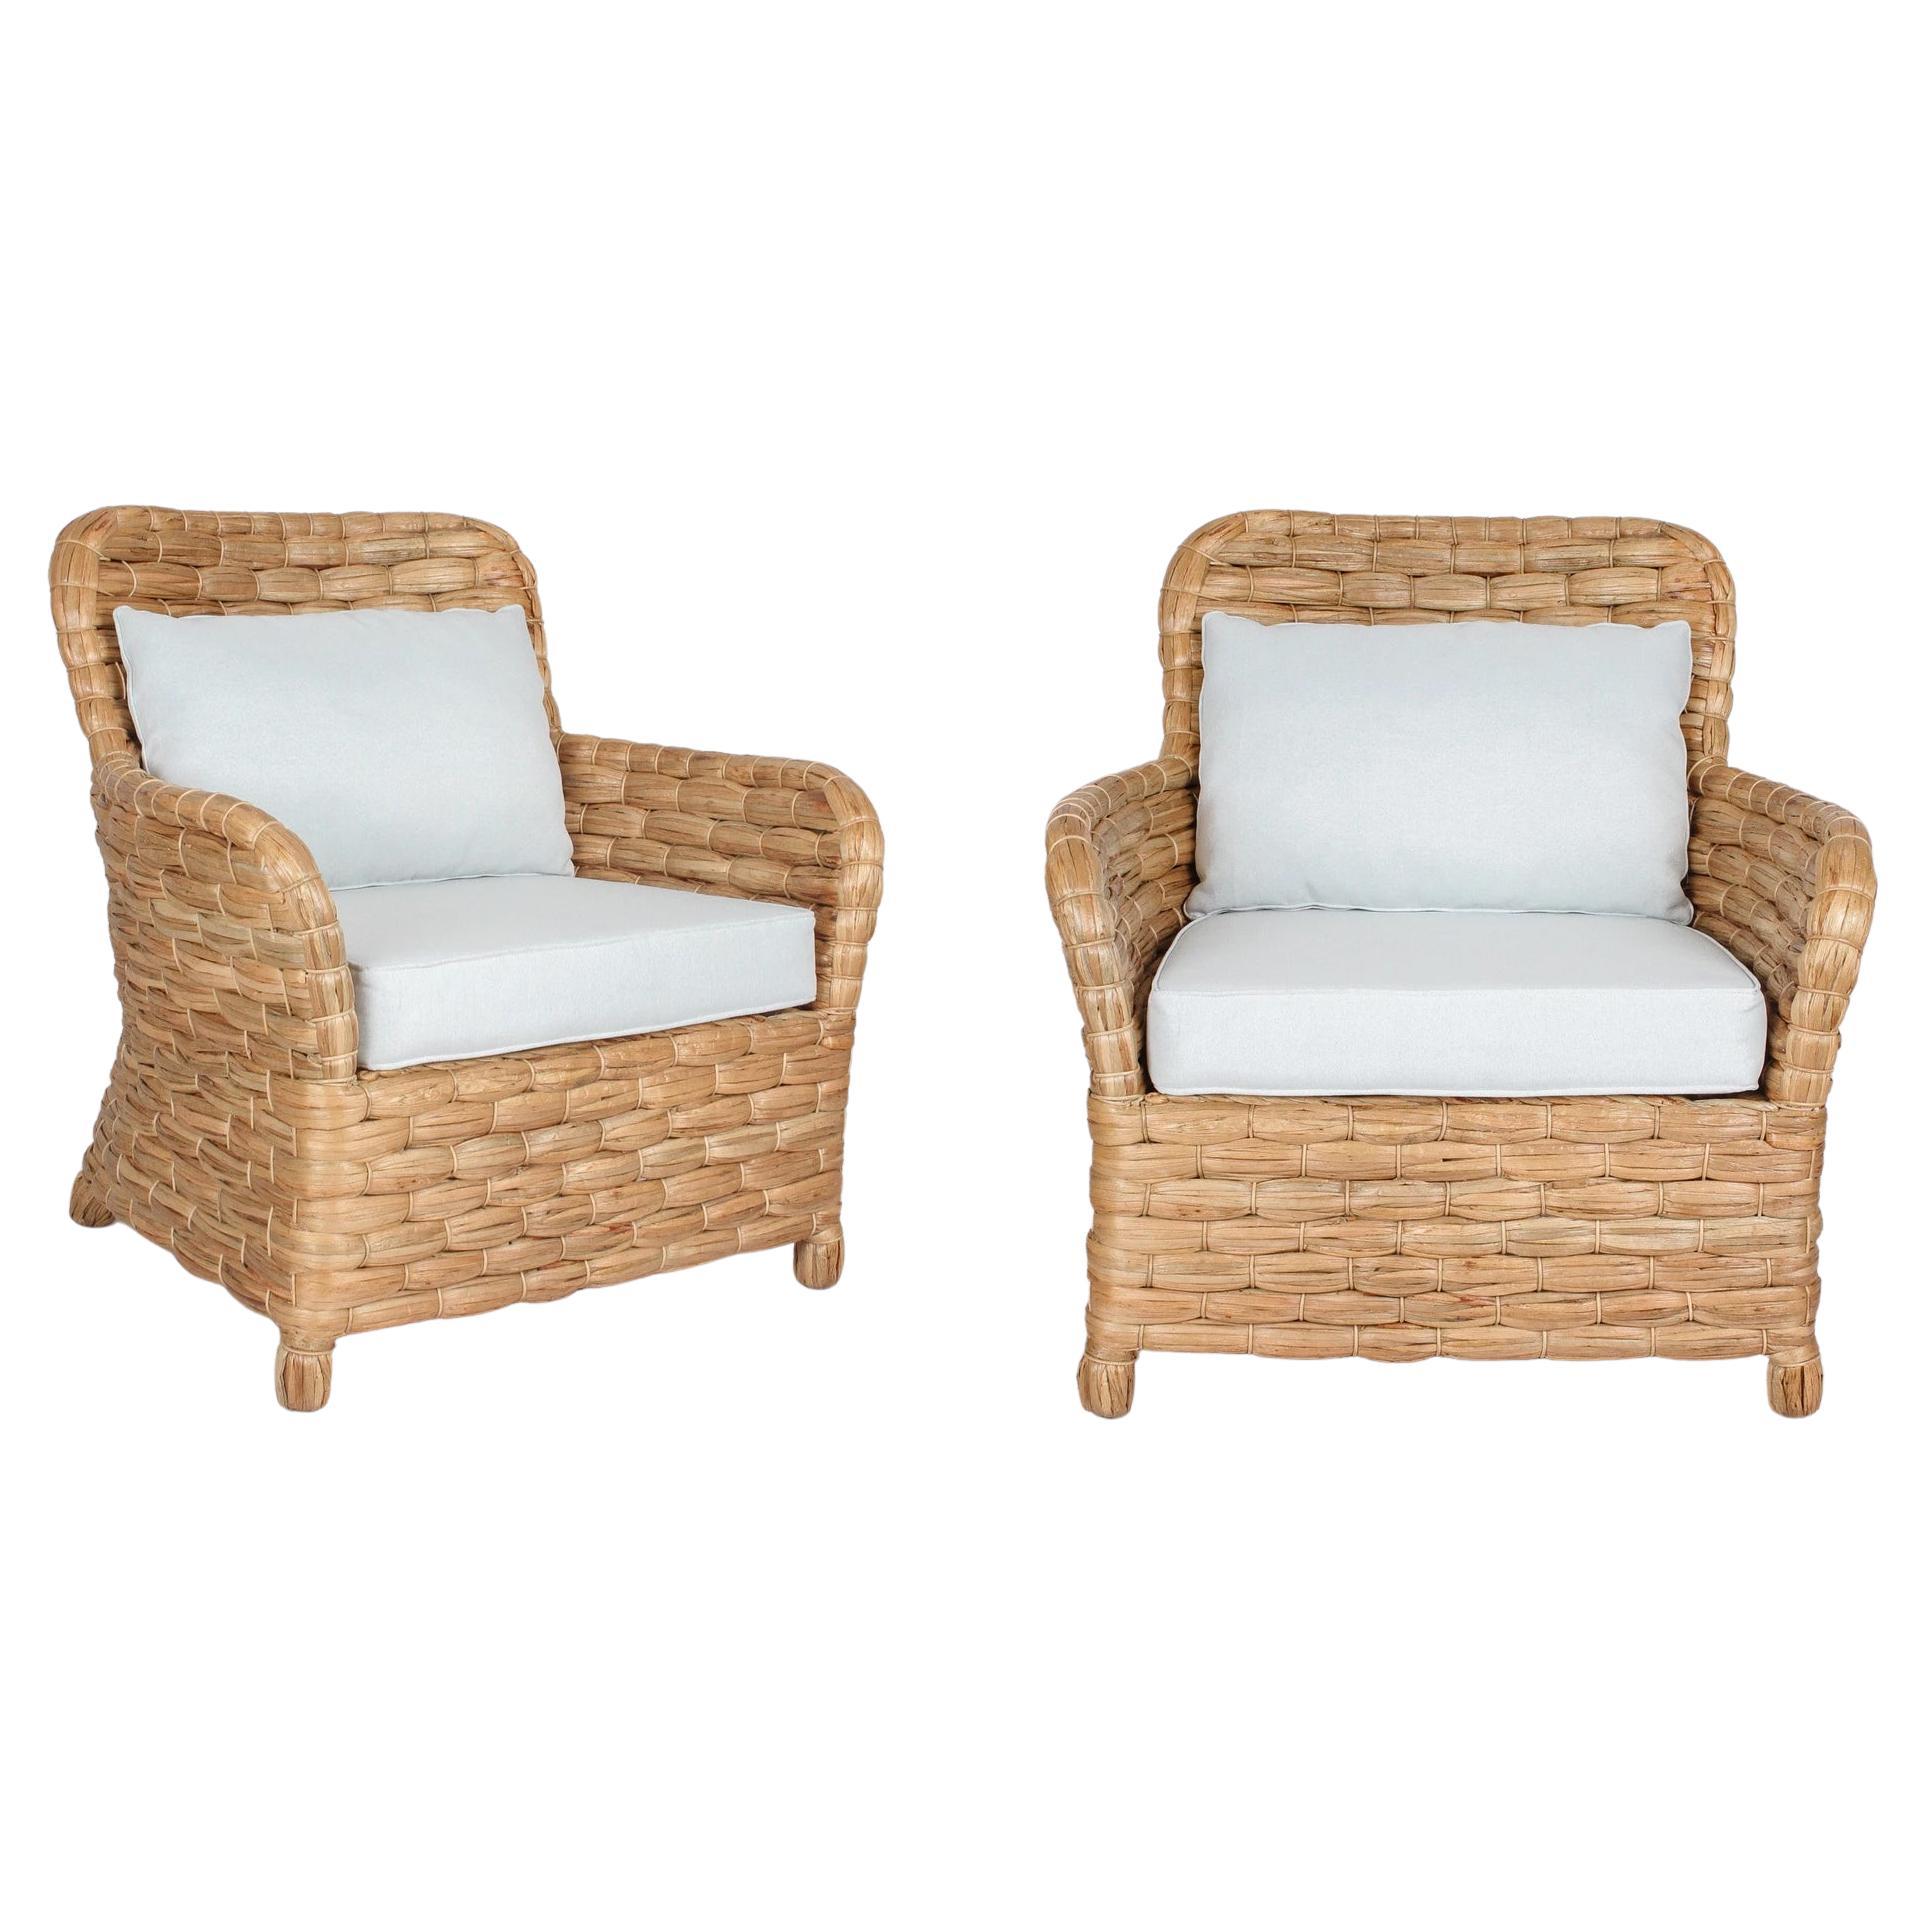 Pair of Rattan Armchairs with Straight Back and Cushions in White Tones For Sale